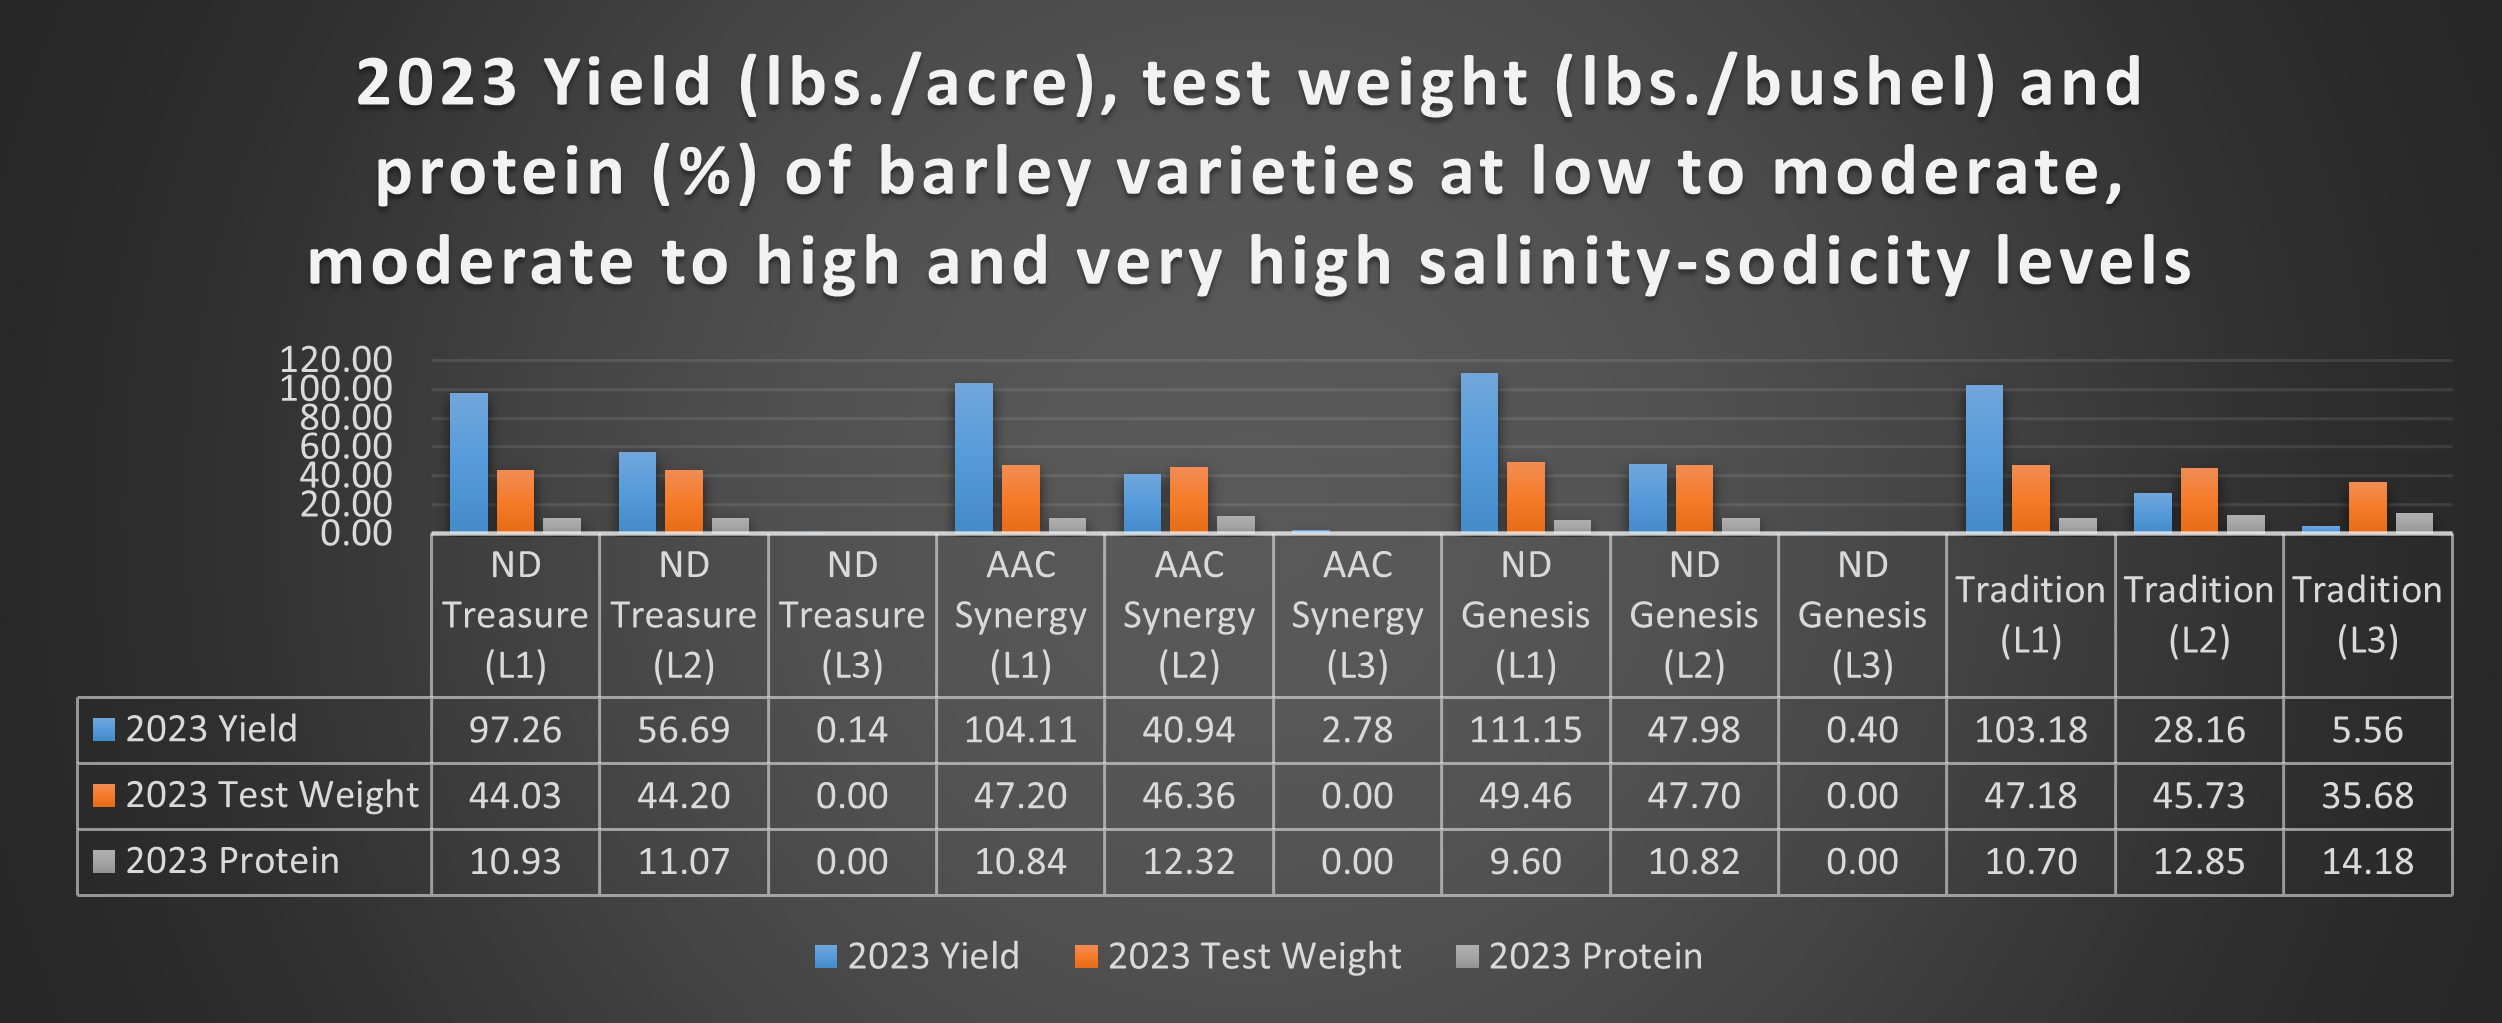 2023 yield, test weight and protein of four barley varieties.